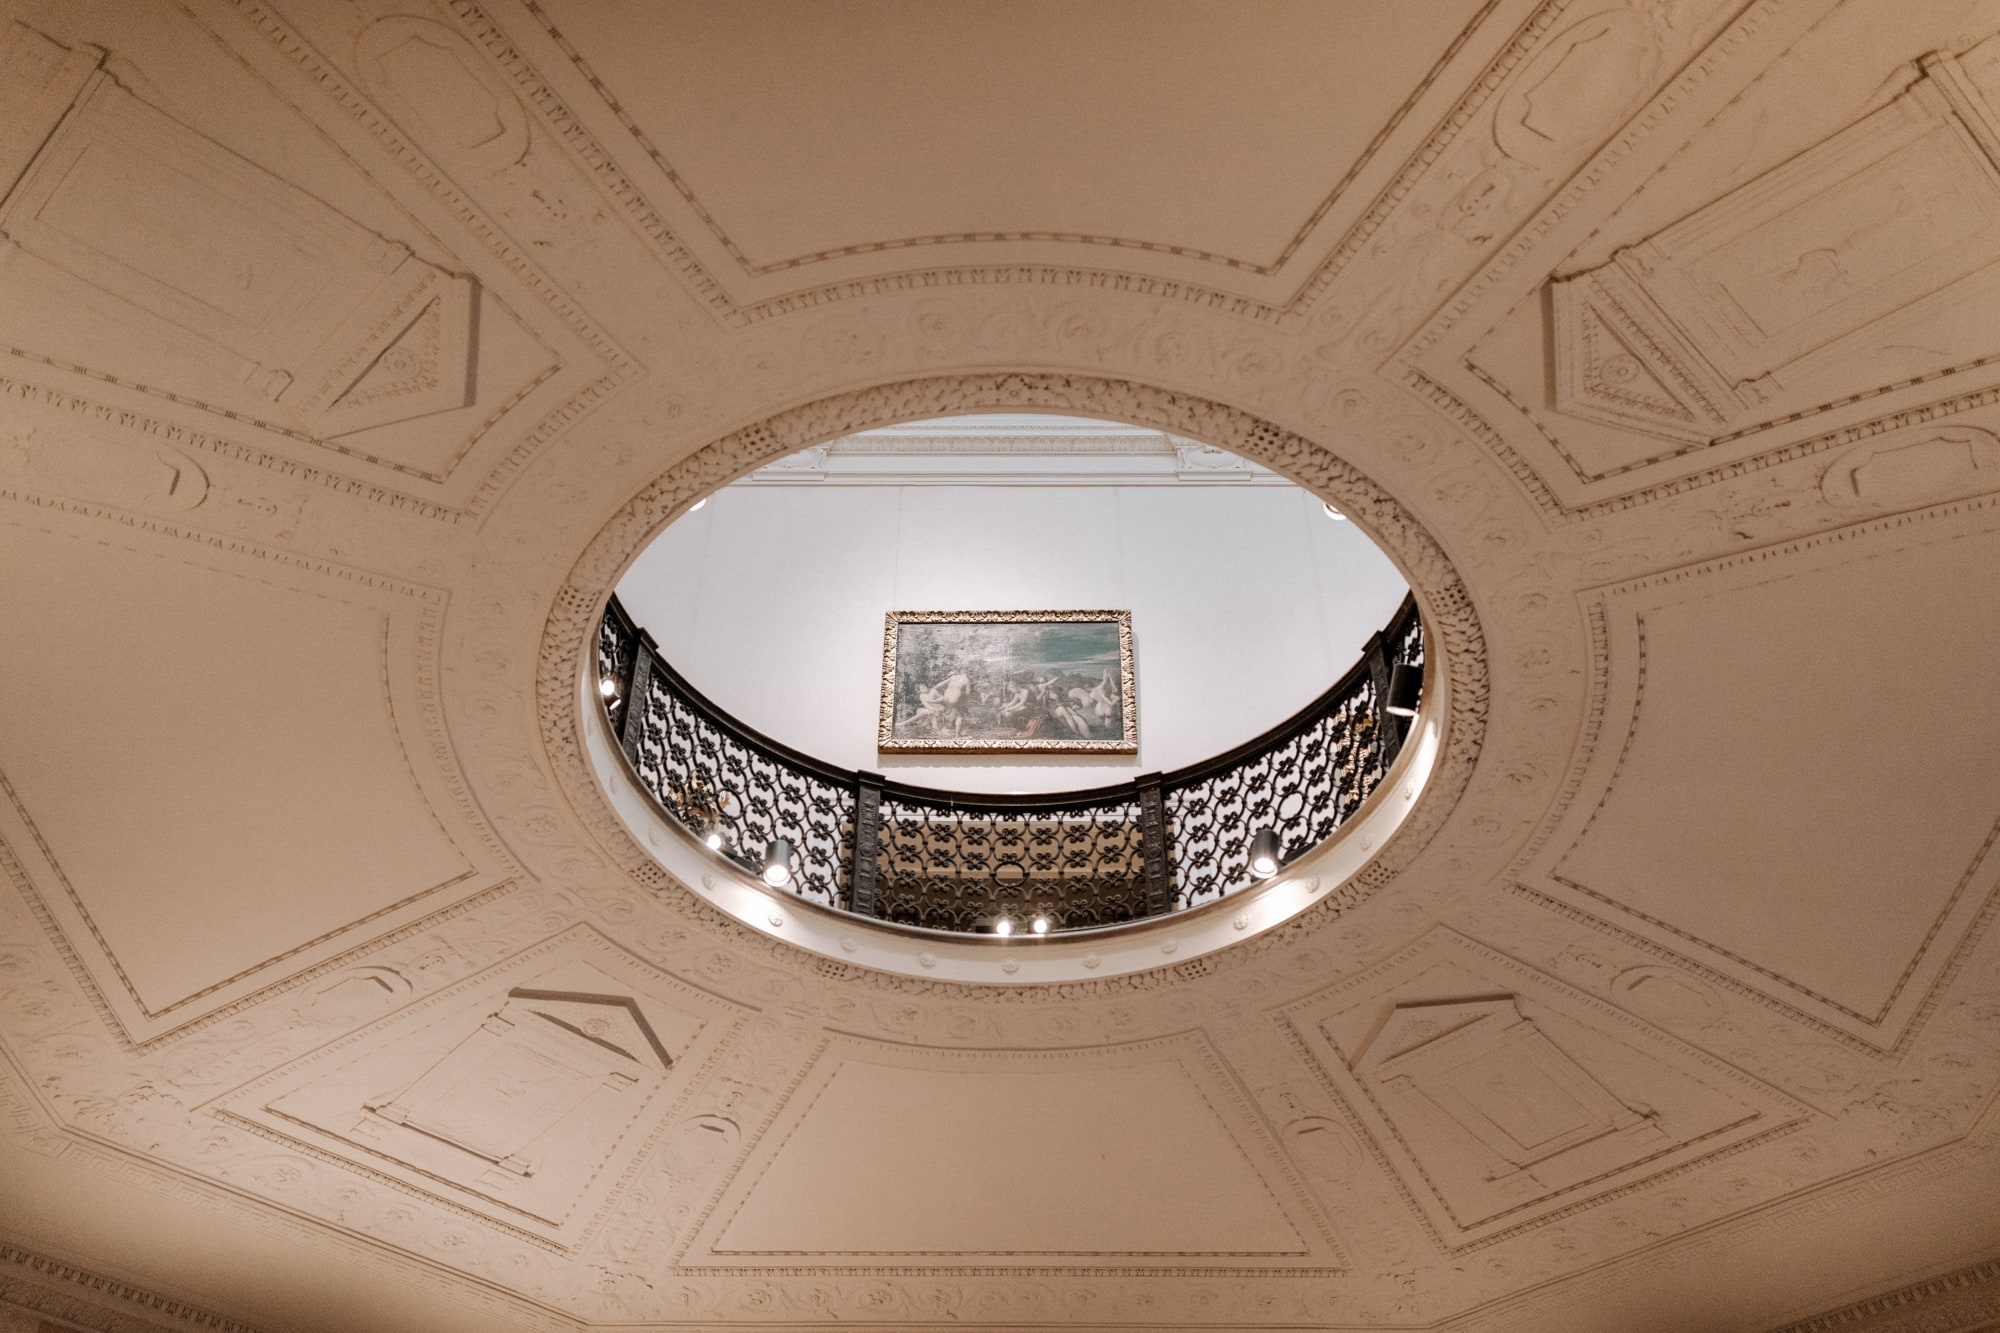 A hole in the ceiling of the lower level of the Minneapolis Institute of Art looks up to a balcony on the upper level.